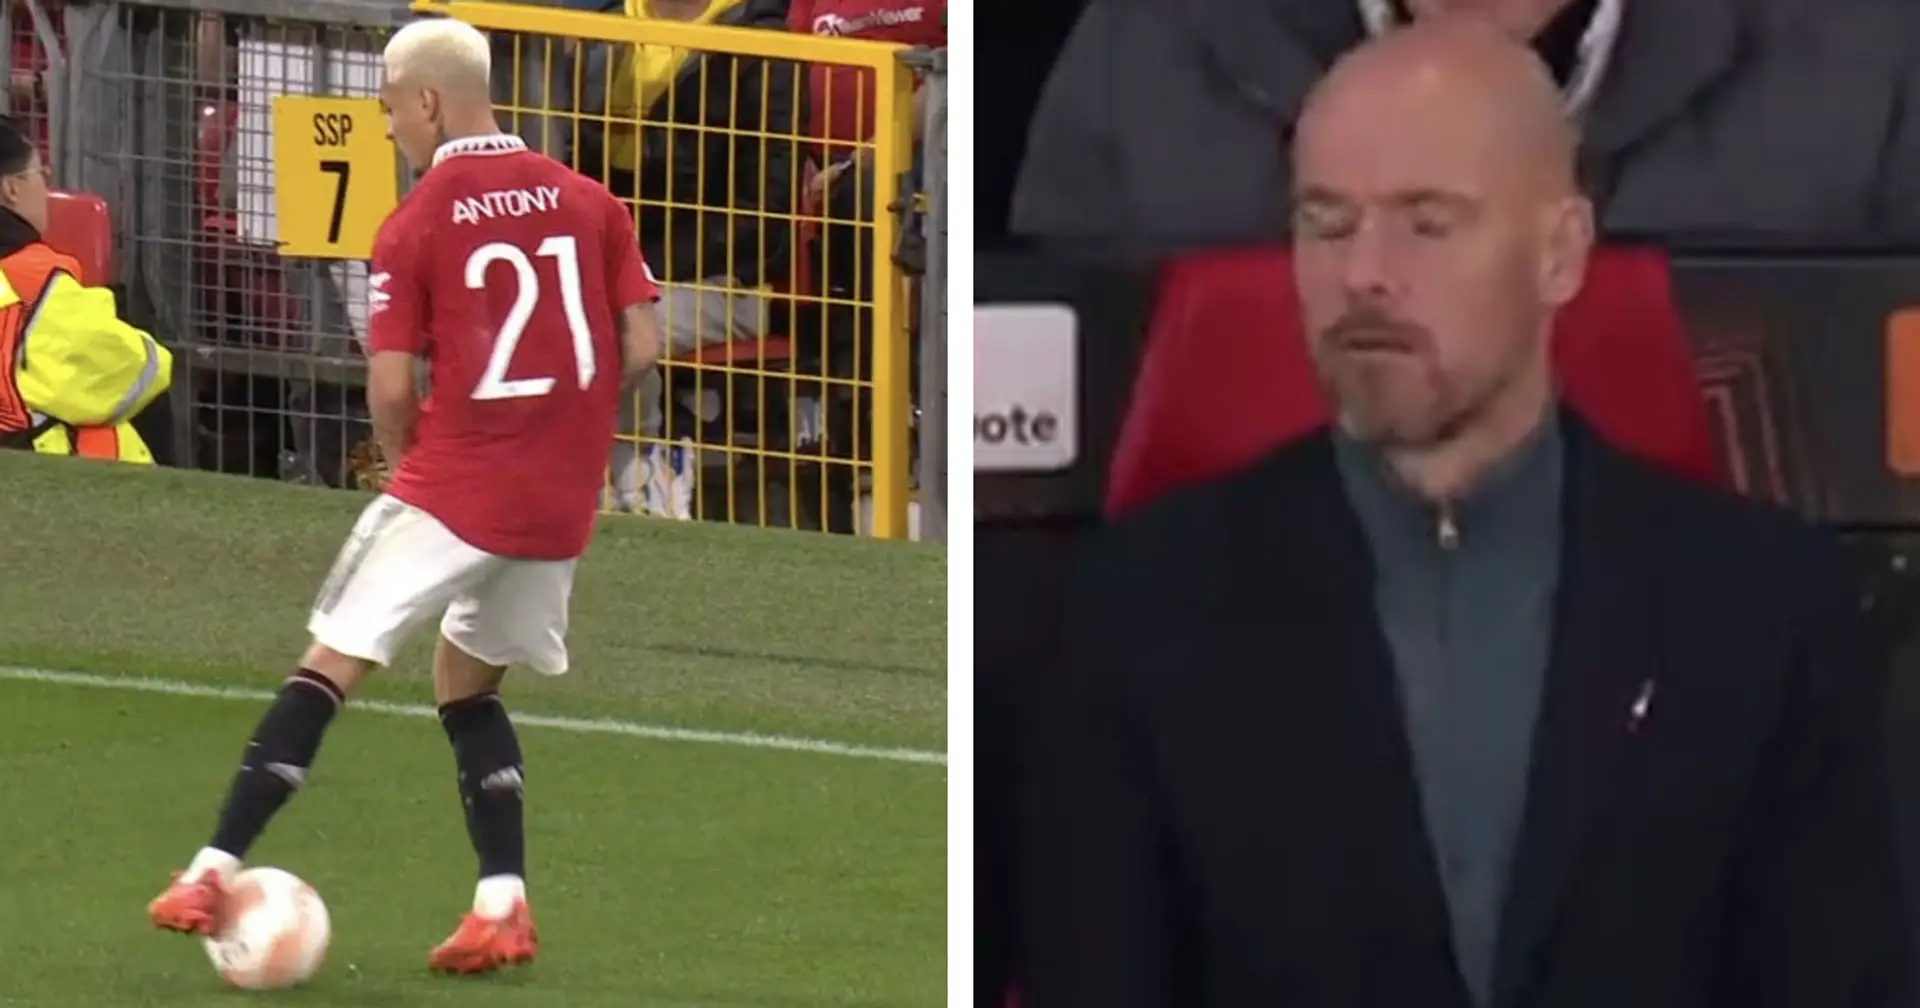 Spotted: Ten Hag's reaction to Antony's failed turning skill is very relatable